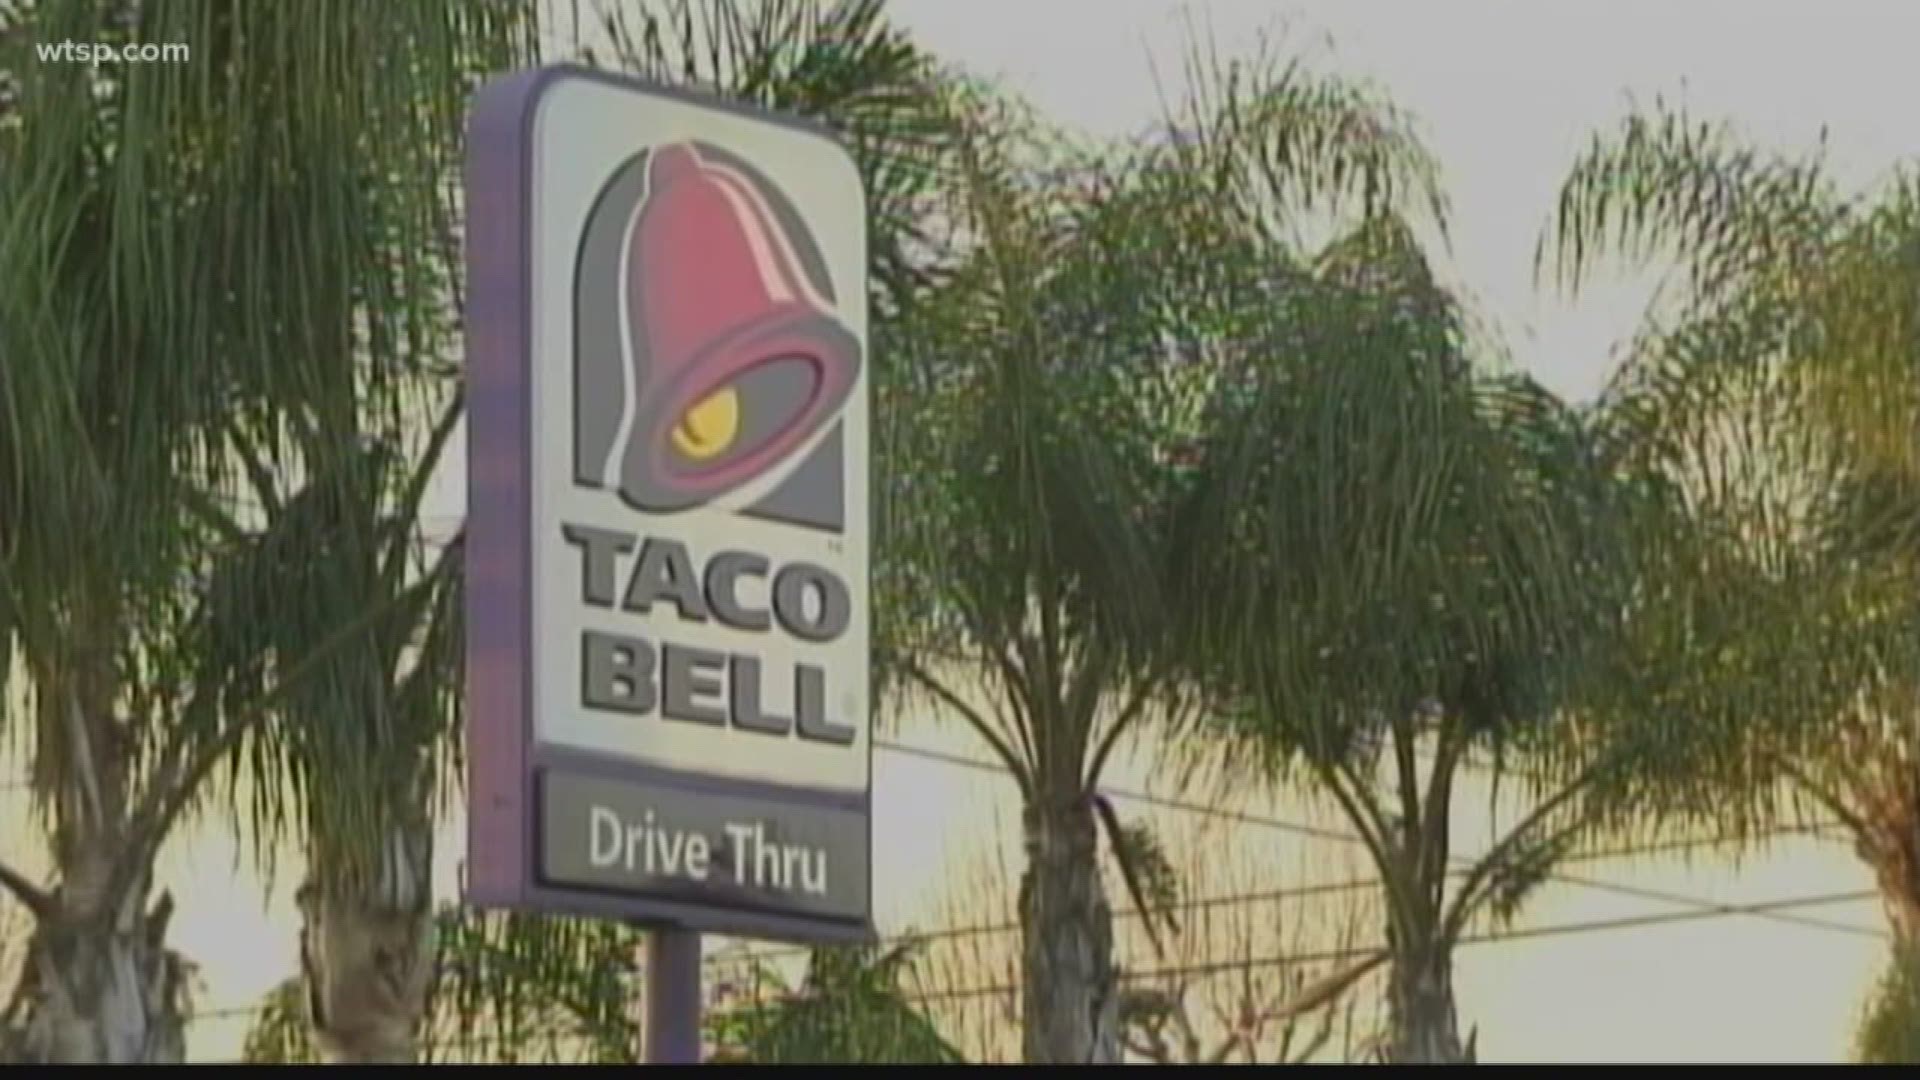 A Taco Bell in Florida is taking heat for the price its charging customers.

Pasco County tax collector Mike Fasano said the Taco Bell in Lutz on SR 54 is charging Hillsborough County sales tax of 8.5-percent even though it’s located in Pasco County. The sales tax for Pasco County is only 7-percent.